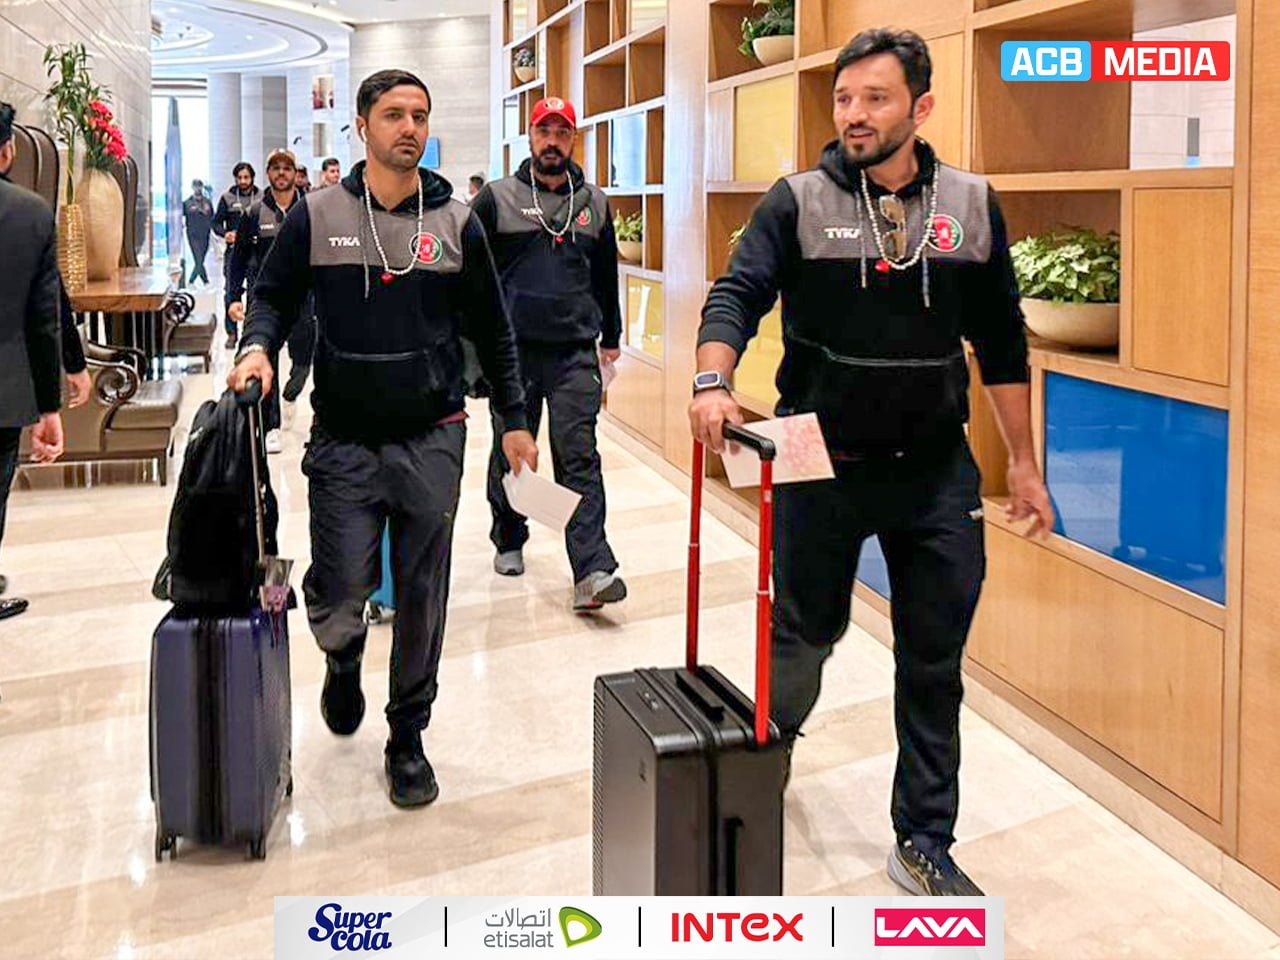 AfghanAtalan have arrived in Mohali for their three-match T20I series against India, starting January 11